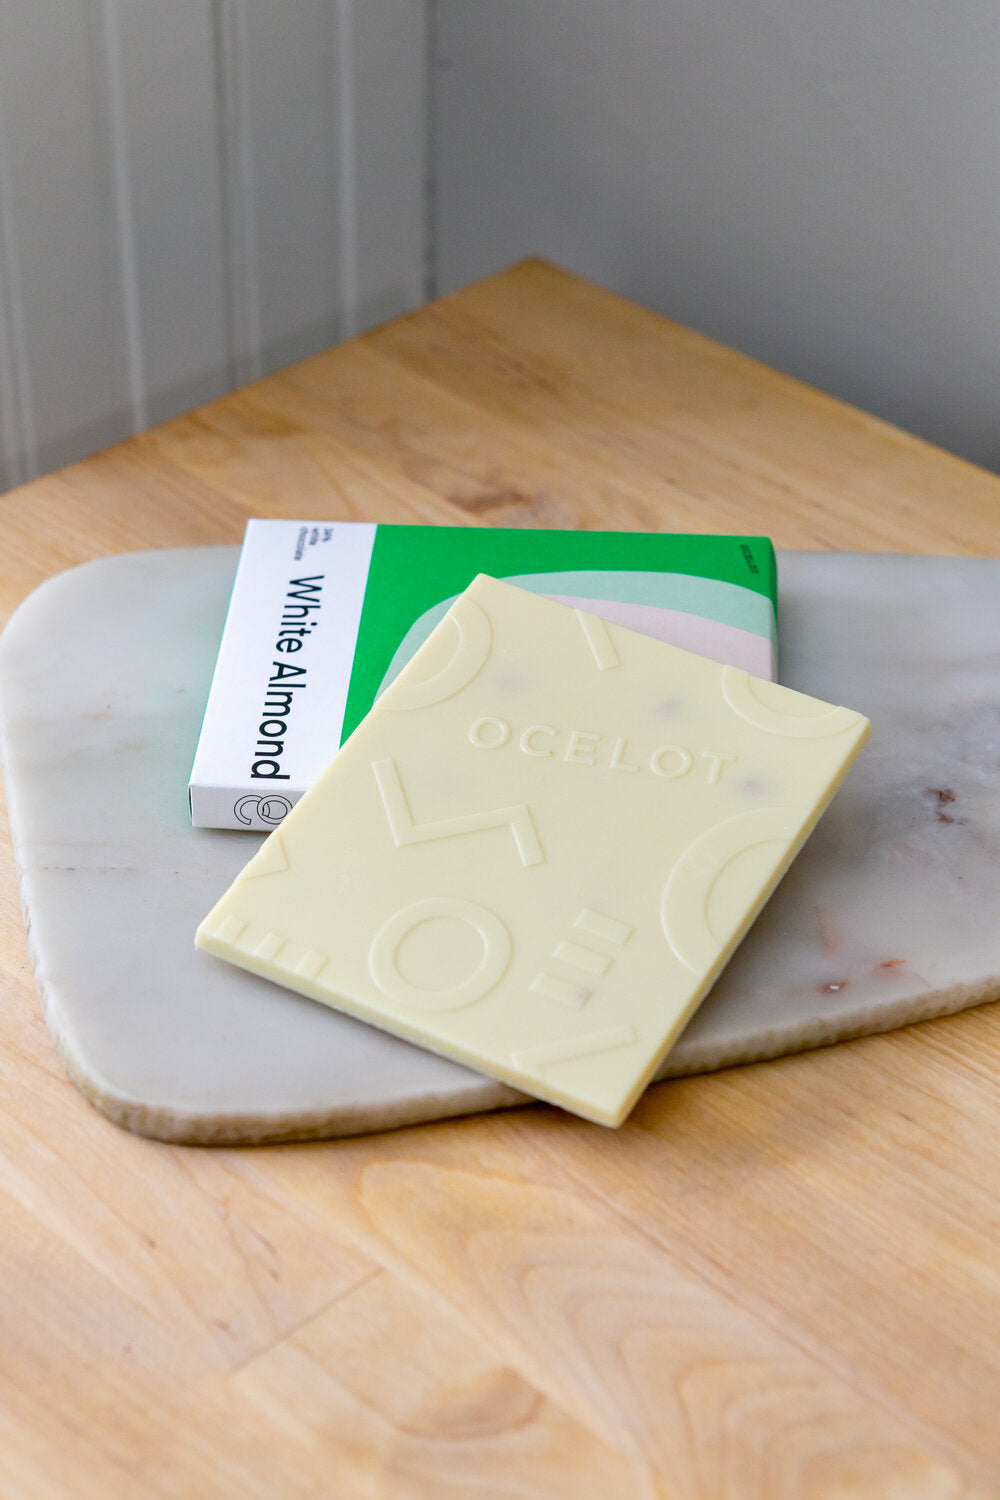 Ocelot Chocolate - Salted Almond White Chocolate